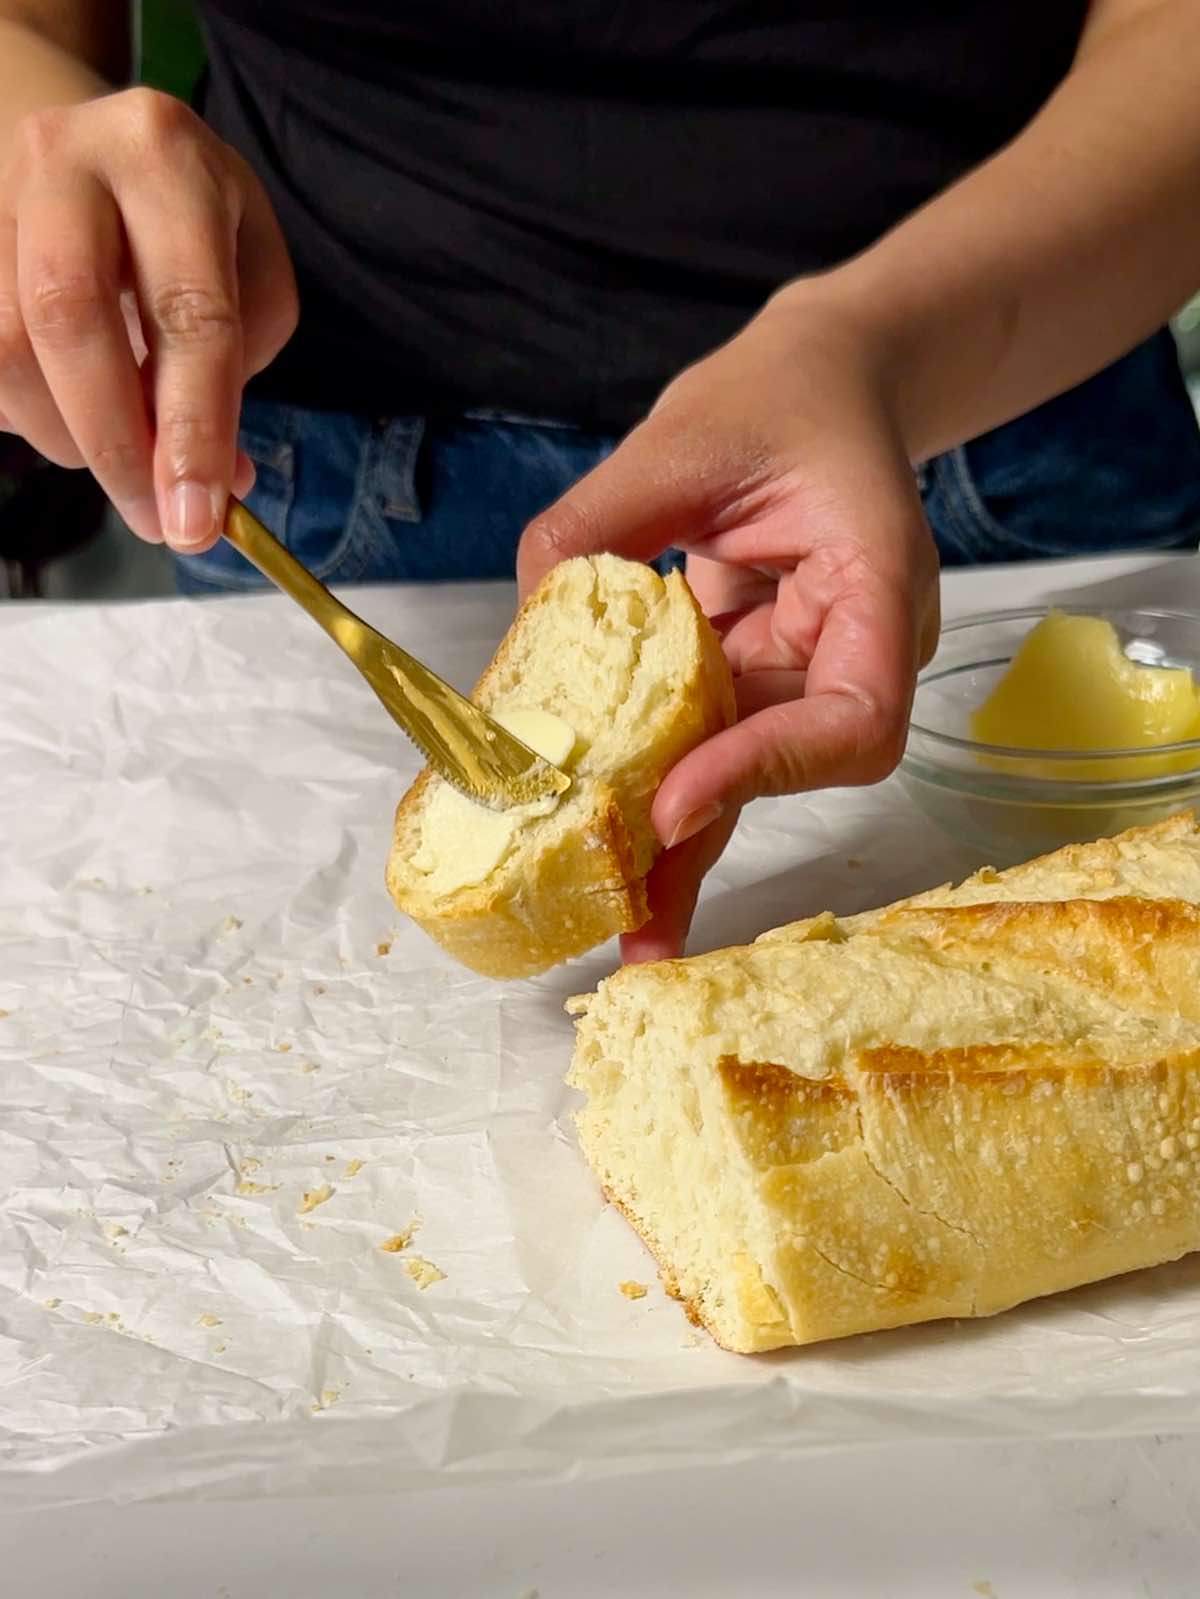 applying butter to a slice of baguette that has been just softened in the oven